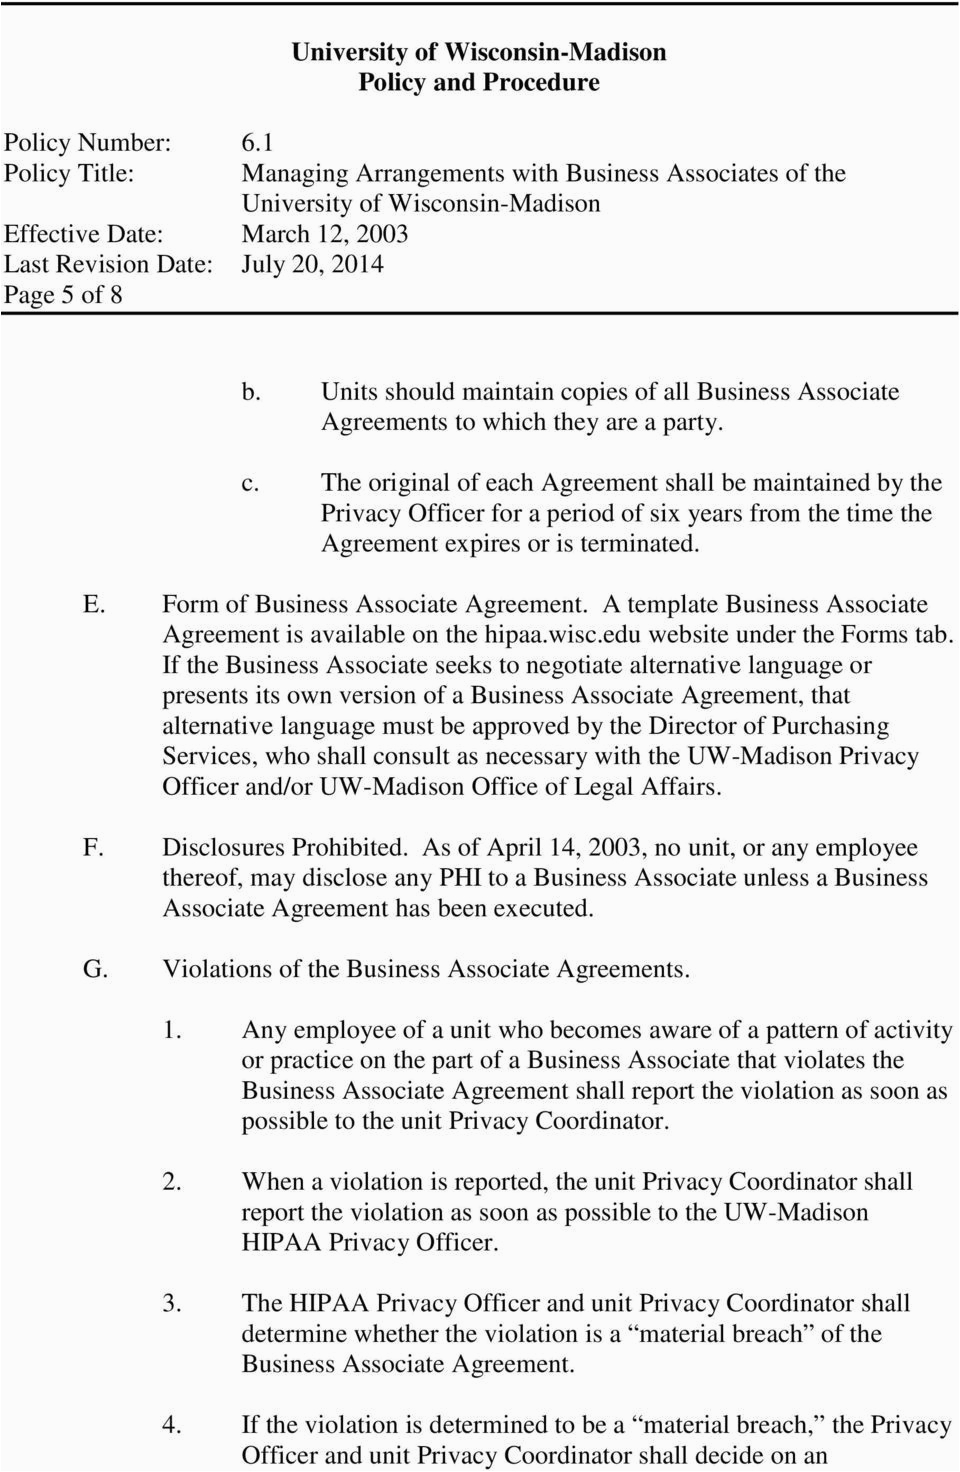 Uw Madison Business School Resume Template Business associate Agreement for Hipaa Victoria Kelly S